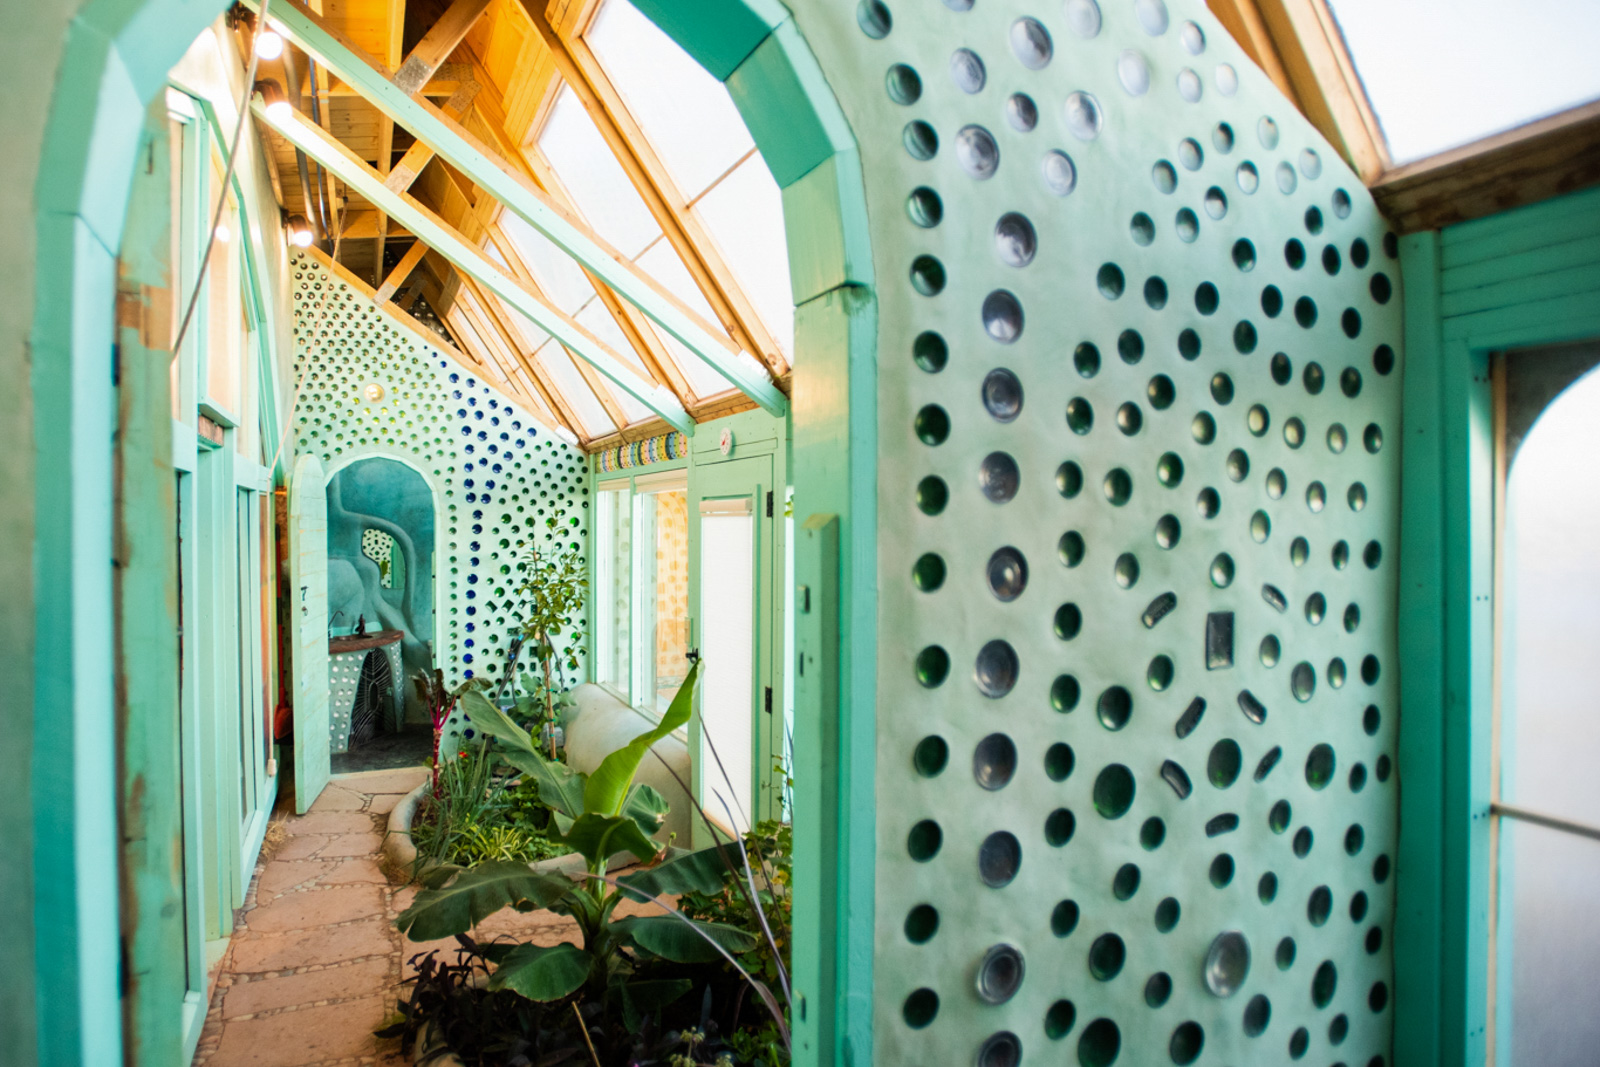 Long hallway view of earthship house with green walls constructed of green earthen material and recycled bottles.